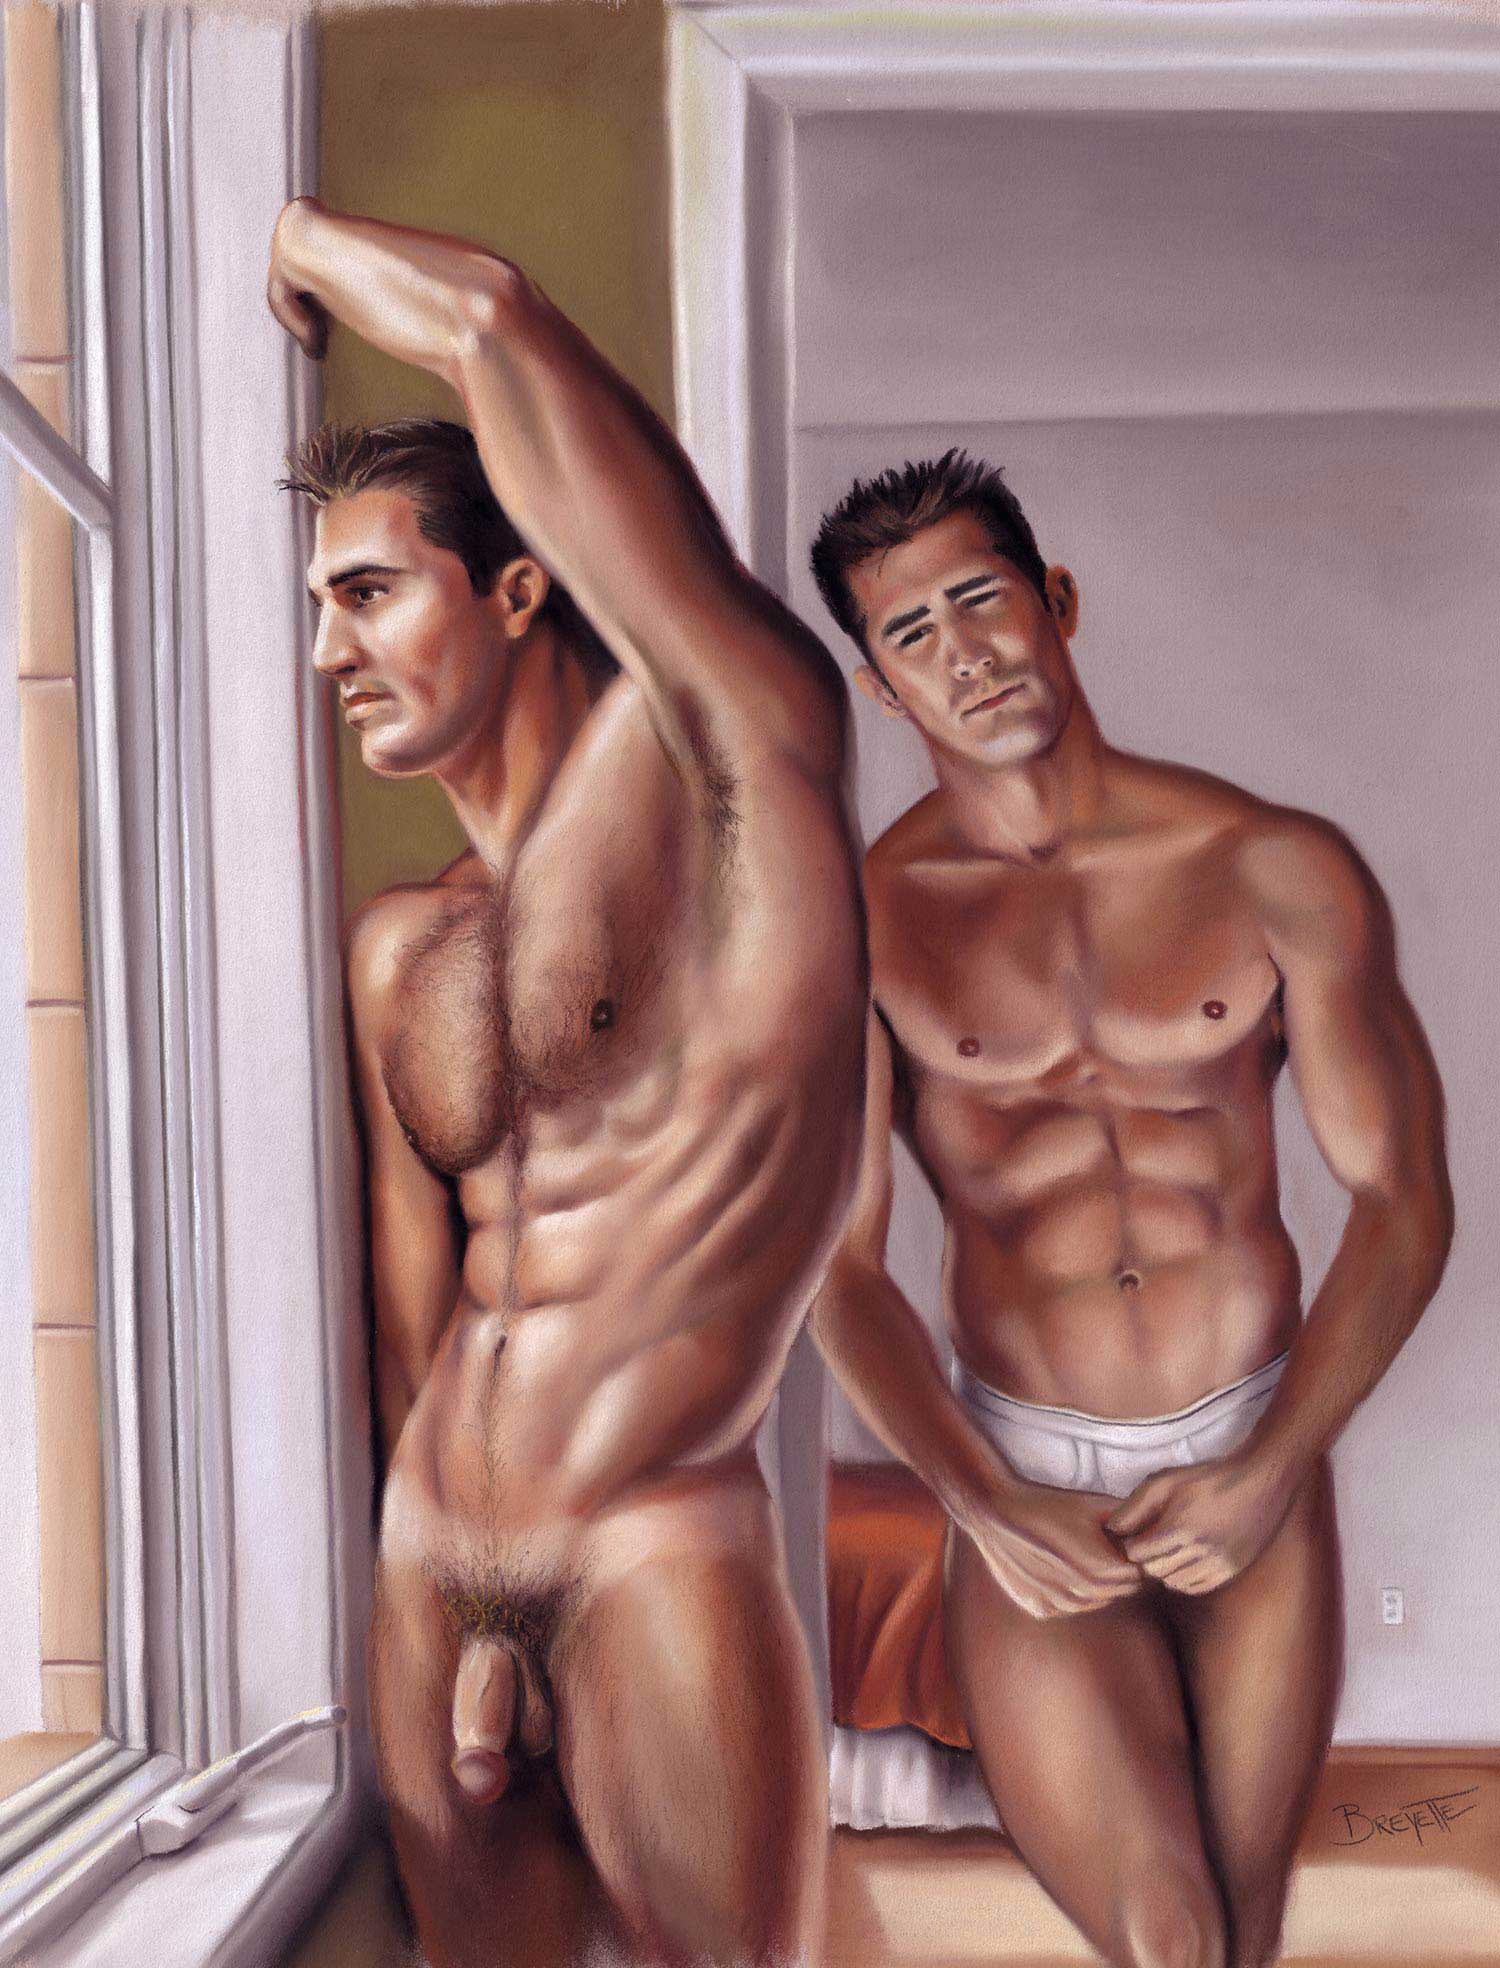 13+ Gay Erotic Art: The Naked Truth Revealed￼